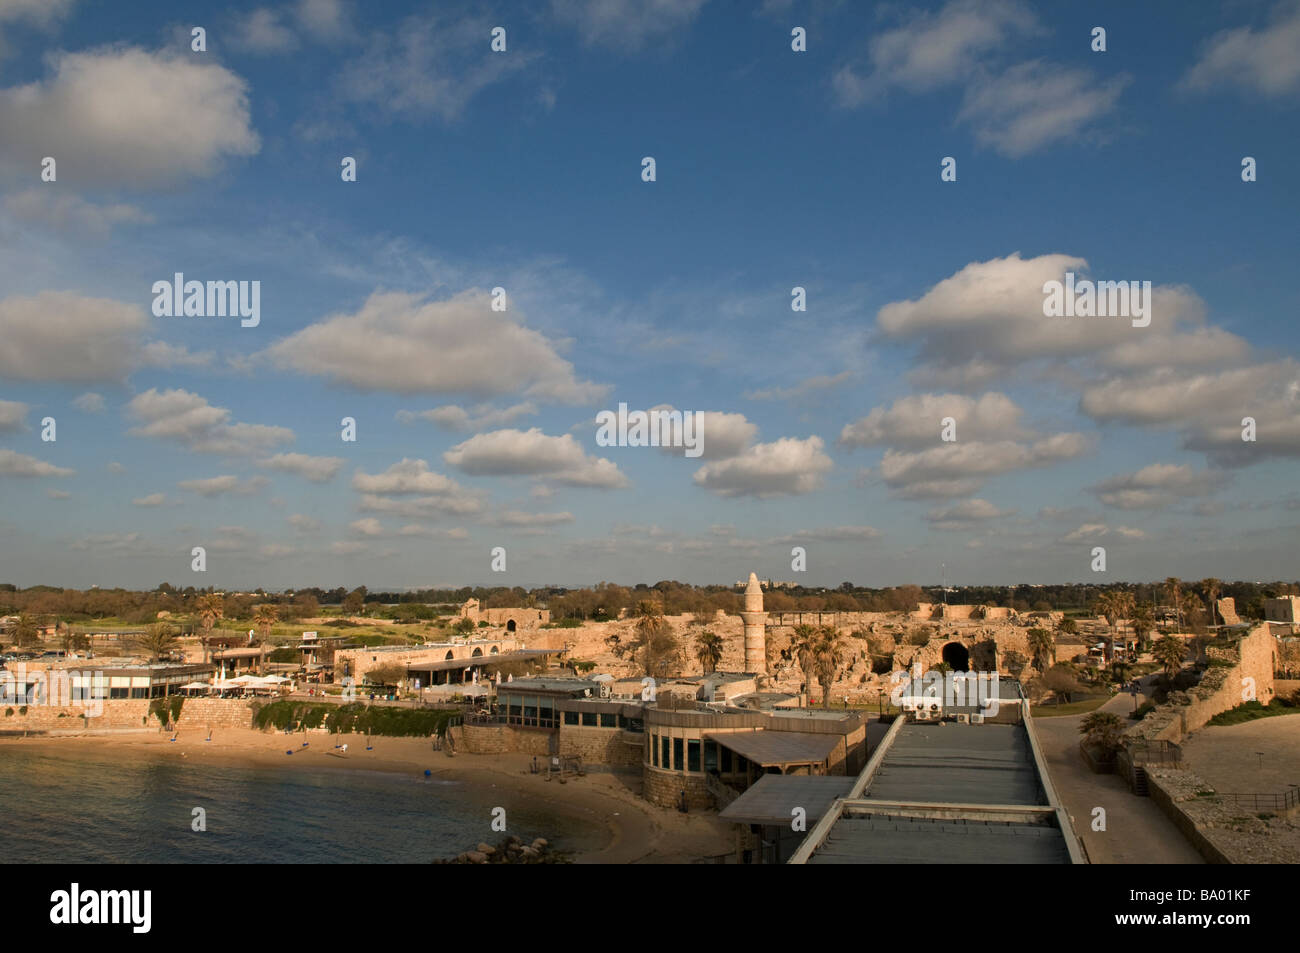 Scenic view of the old port and ancient site in Caesarea national park Israel Stock Photo